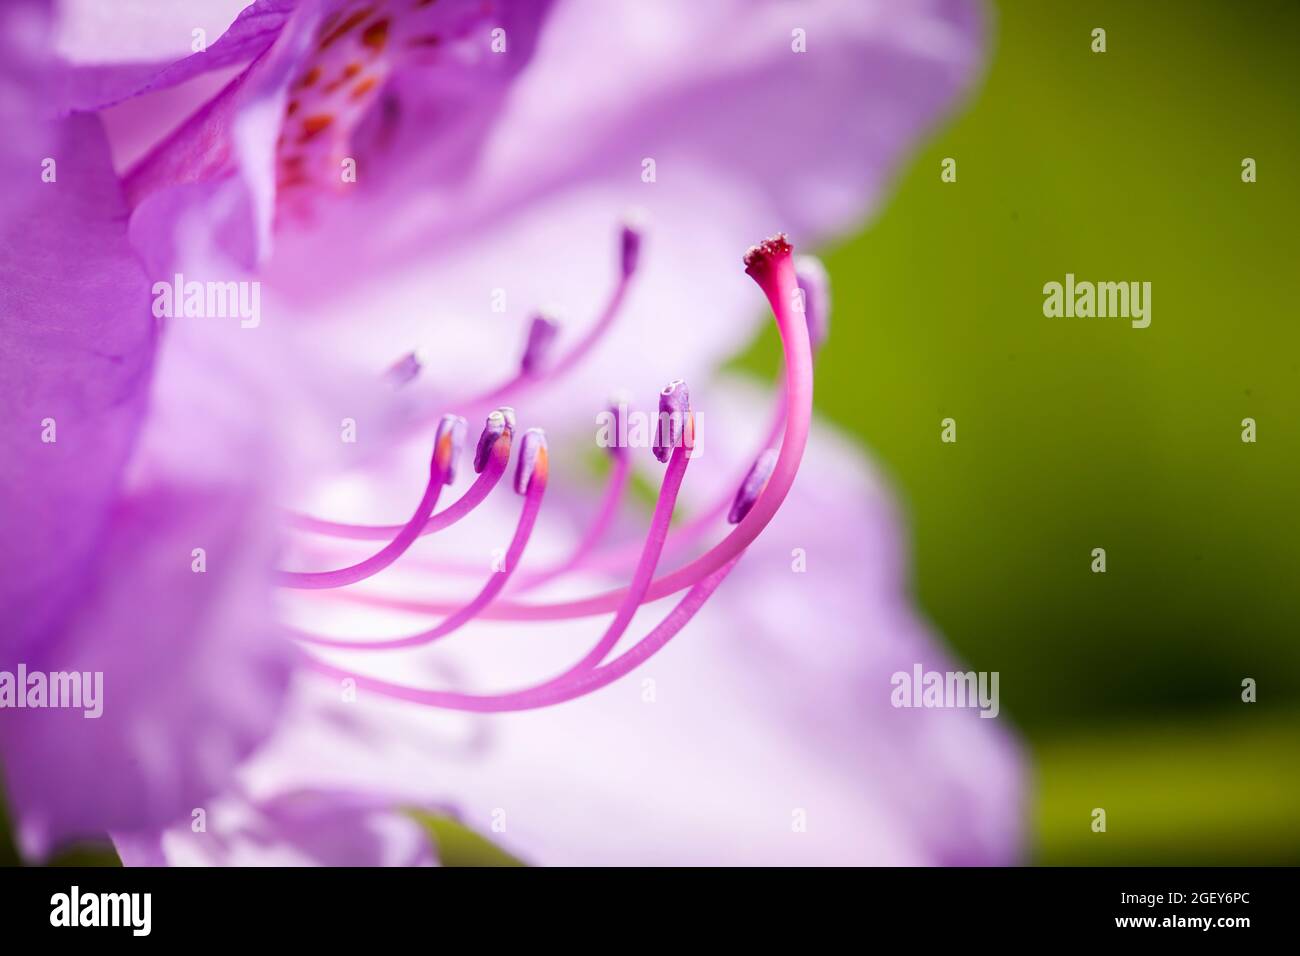 Macro shot of a pink rhododendron flower with easily recognizable stamens in front of blurred petals and a green background. Stock Photo